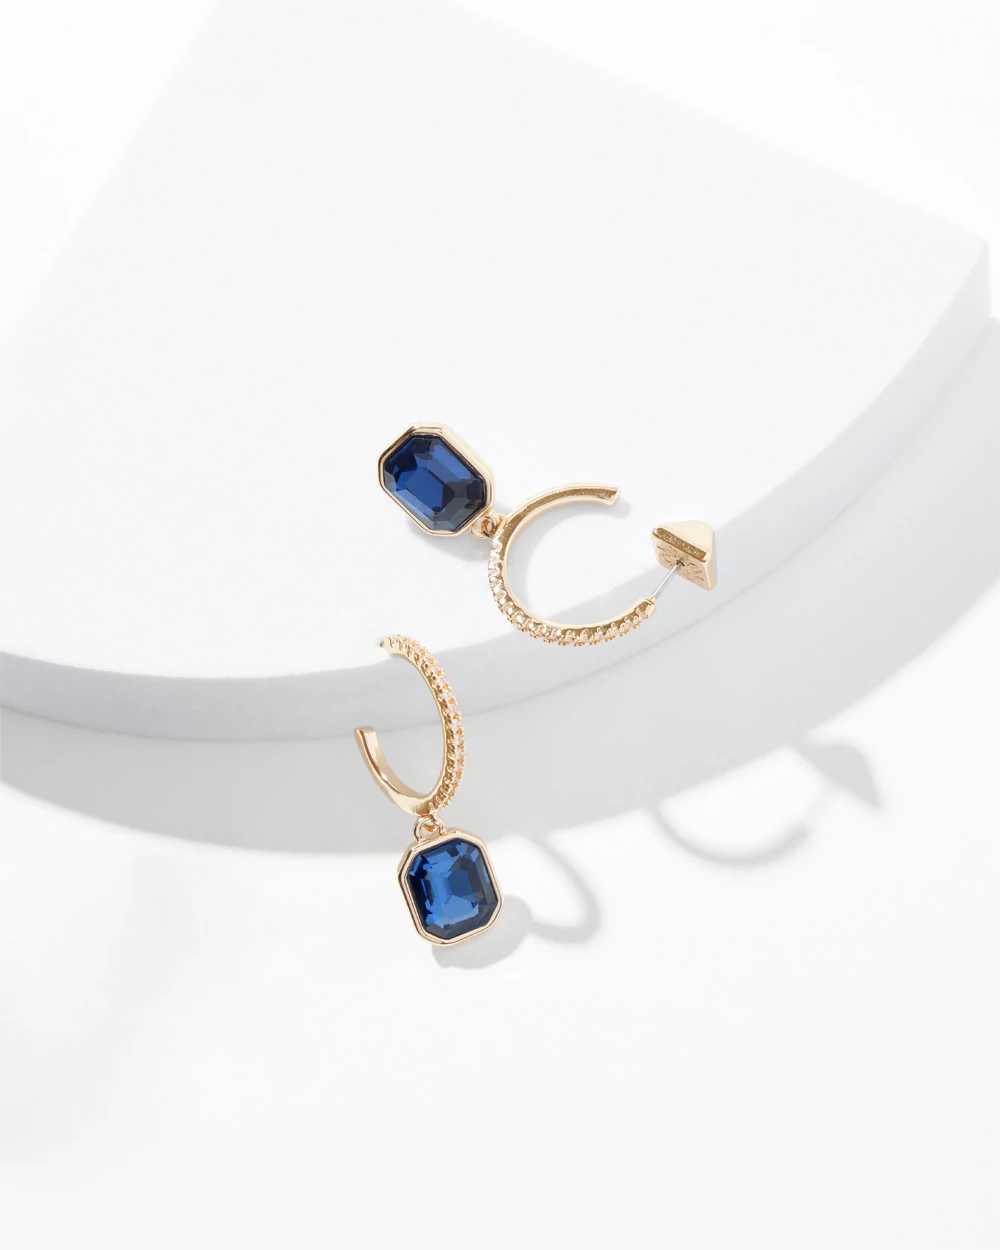 Gold Dark Blue Drop Hoop Earrings click to view larger image.